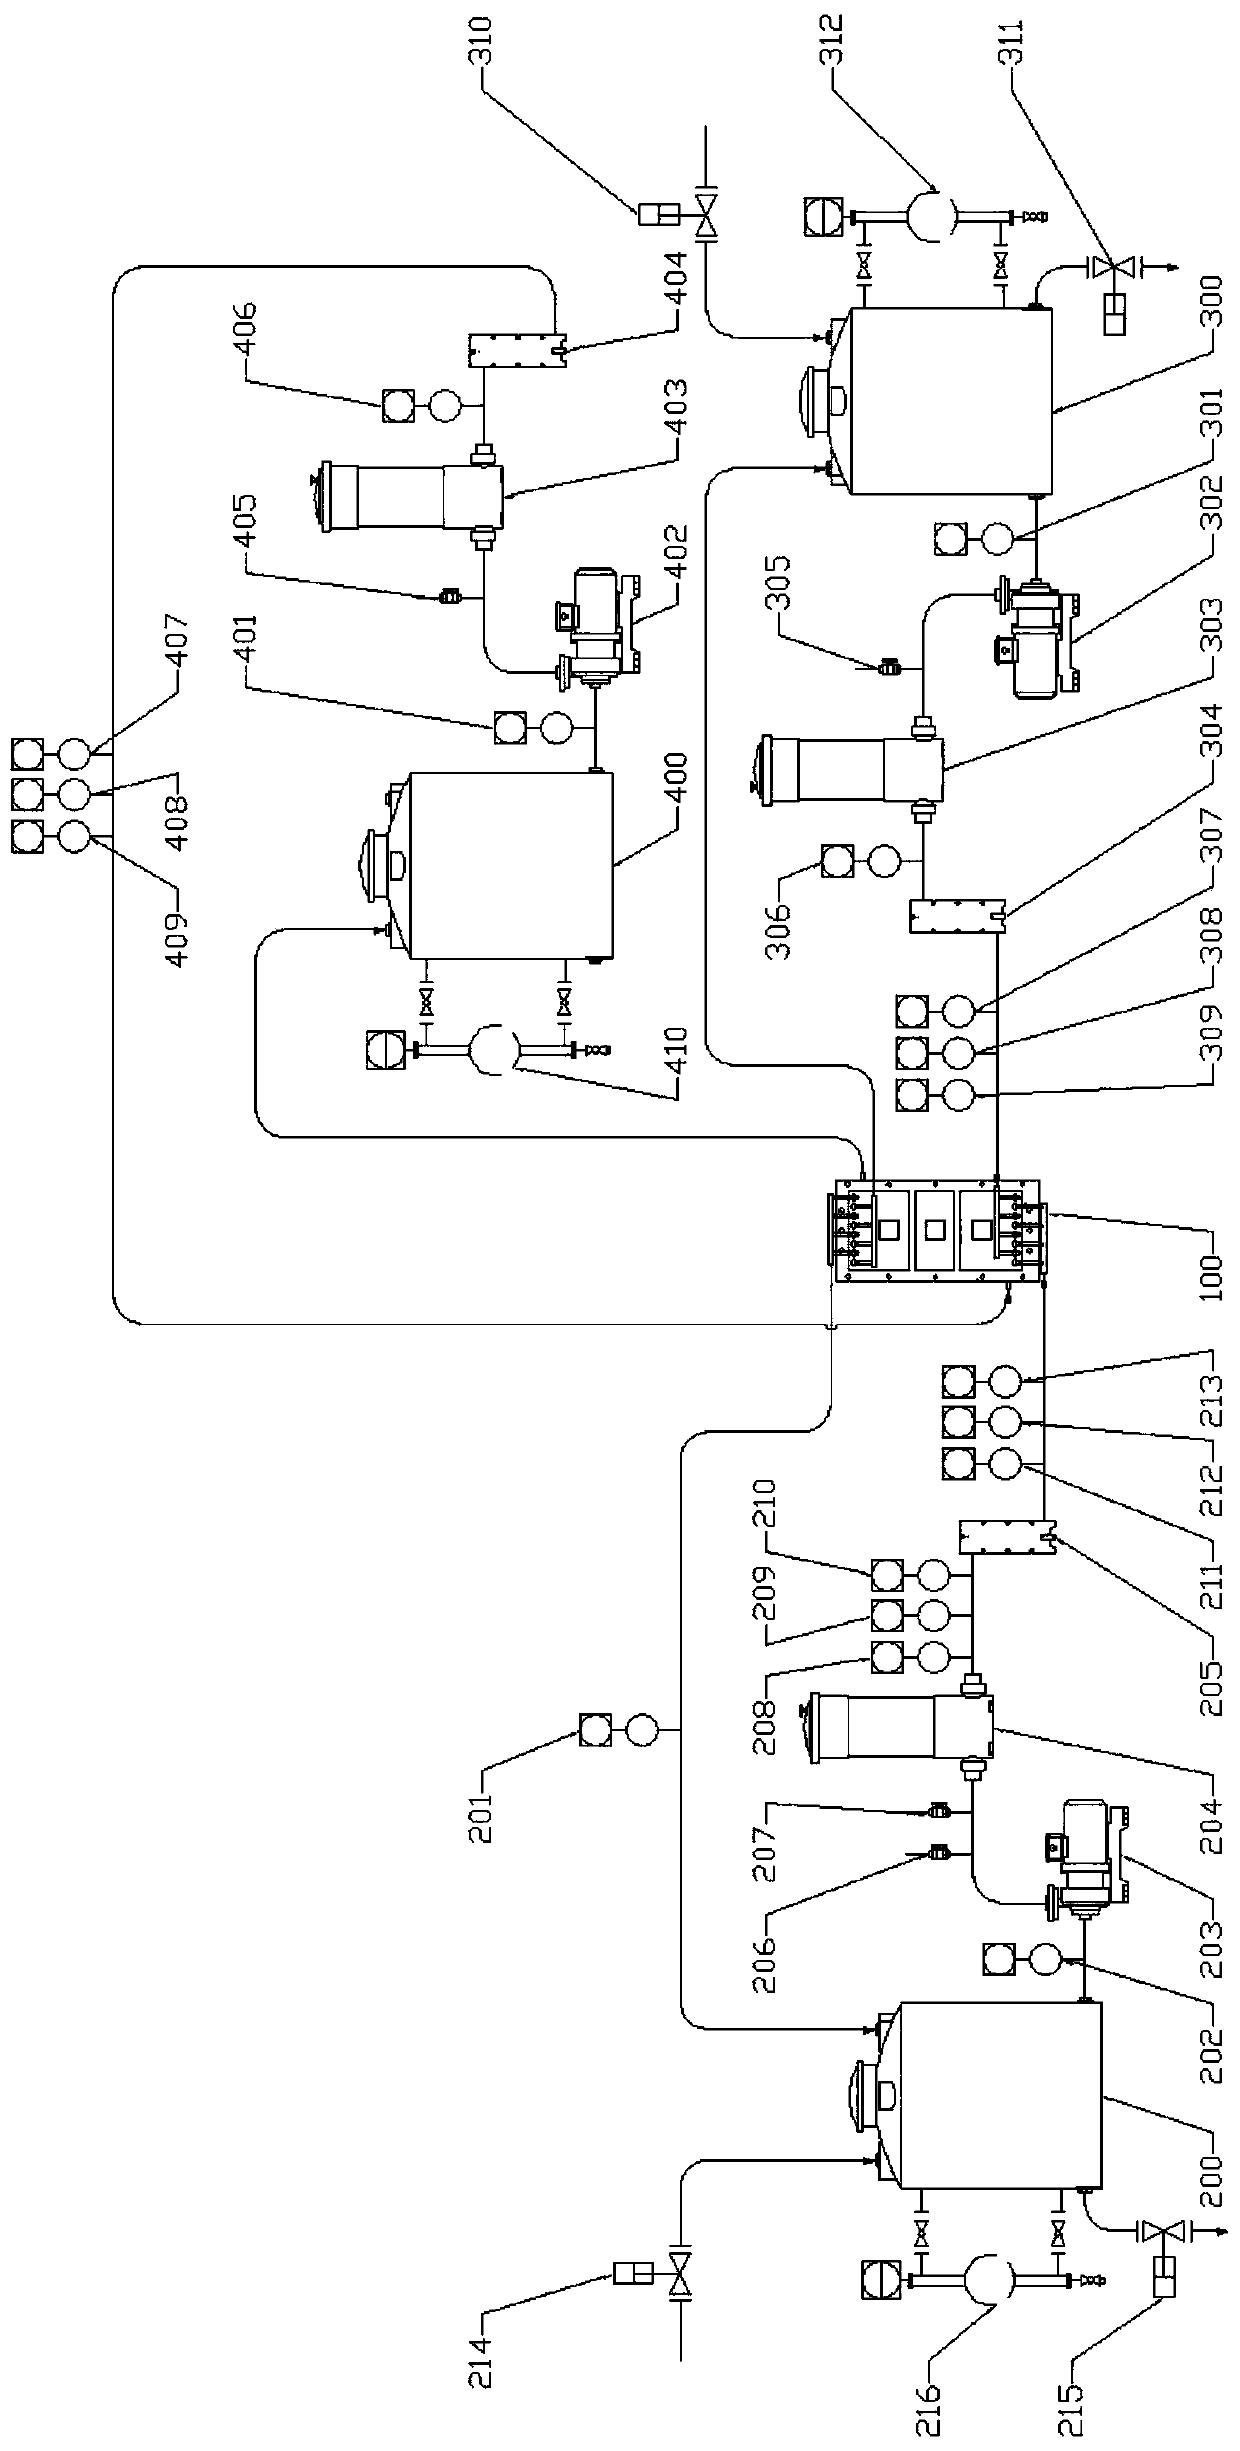 Automatic control system for operation and protection of electrodialysis system